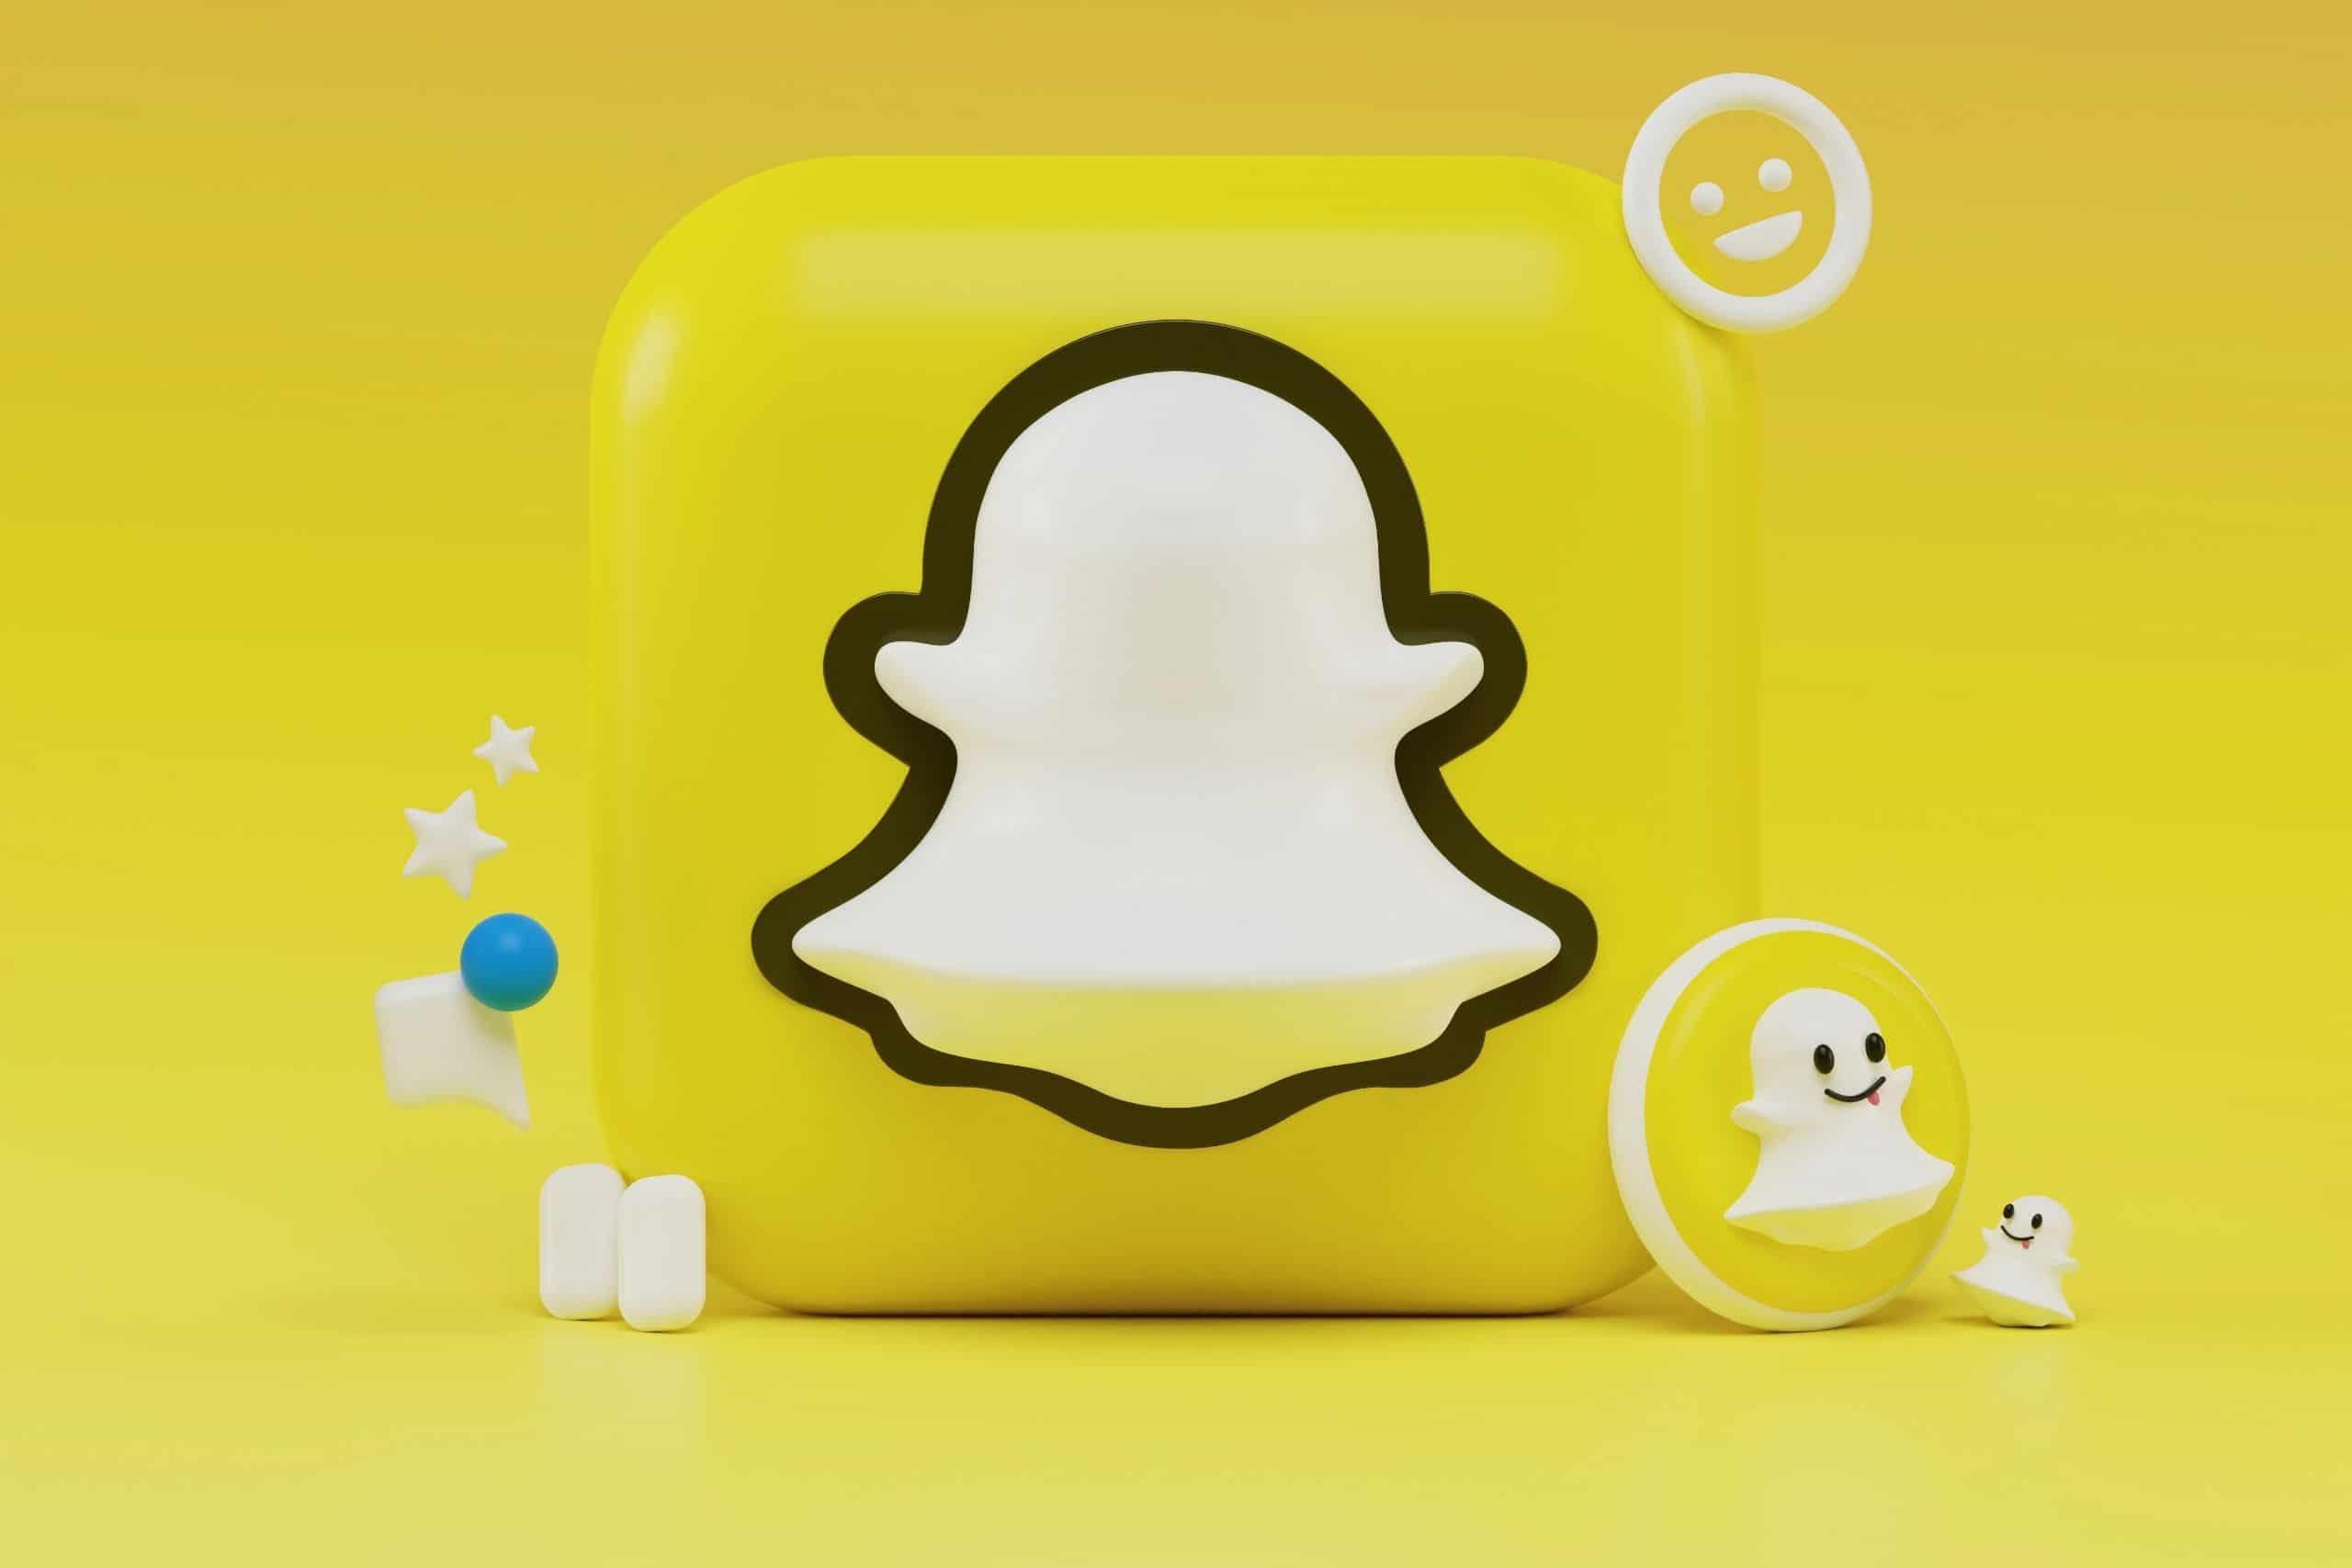 How To Make Money On Snapchat: Generating Income with Premium Content on Snapchat